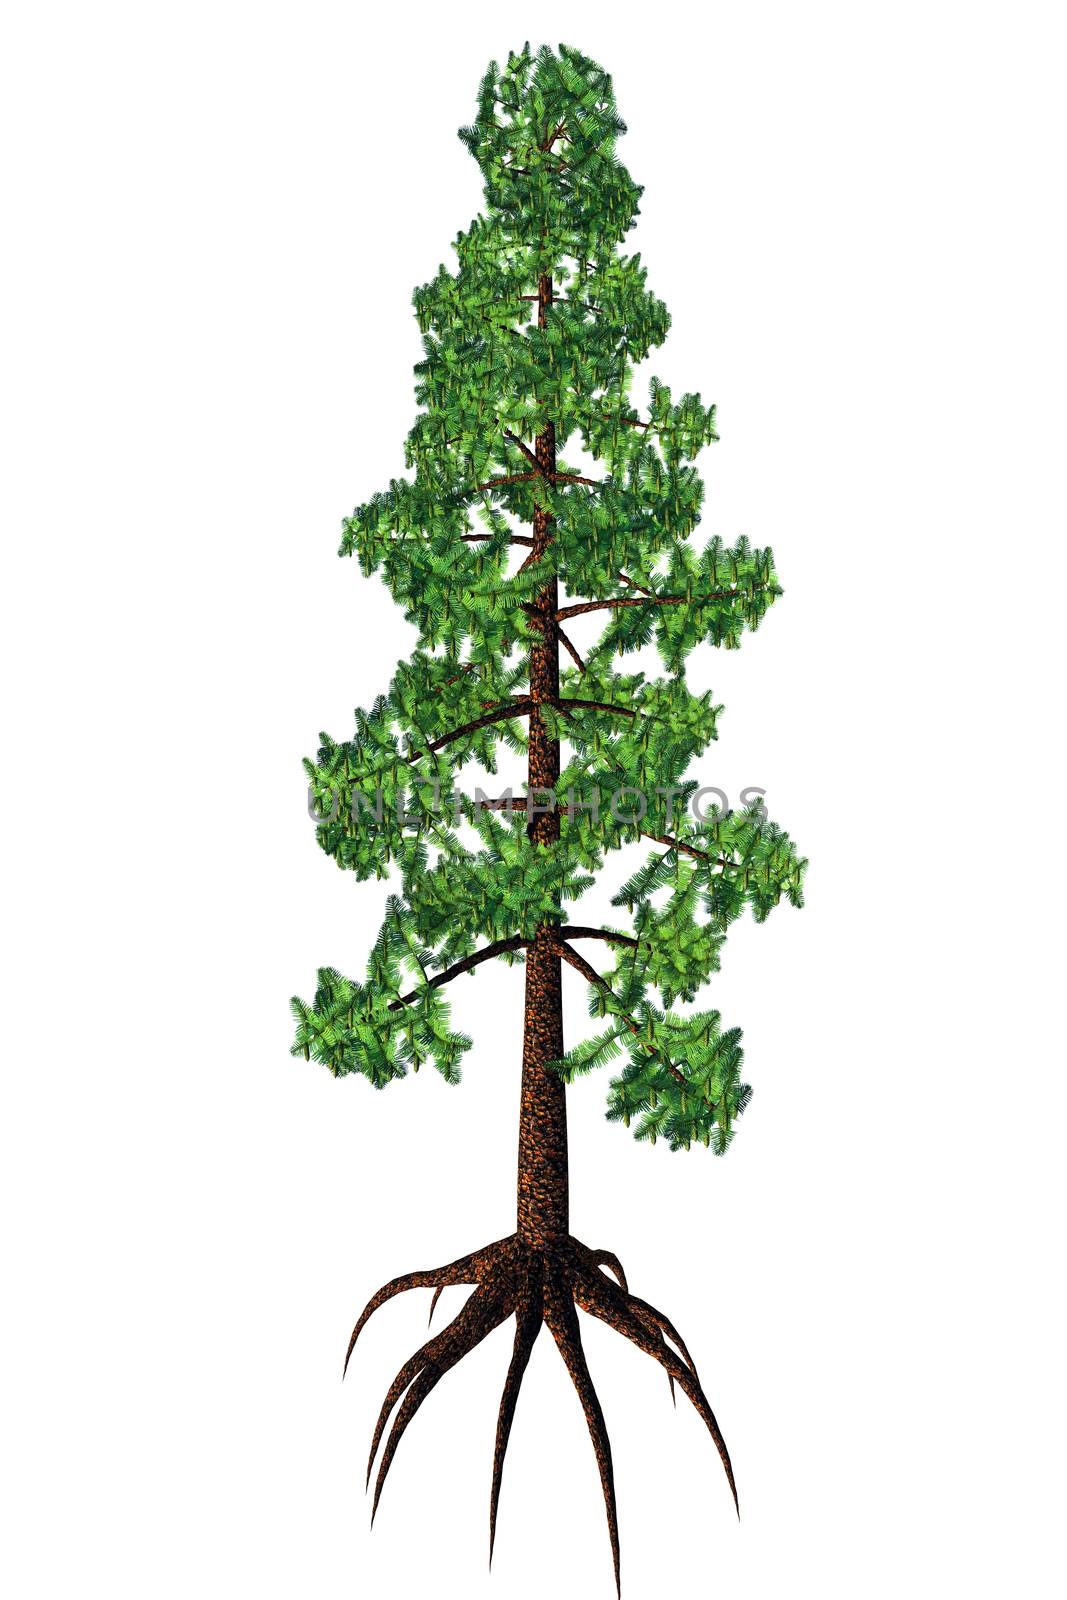 Wollemia was thought to be an extinct coniferous tree but was found to be living in Australia in 1994.